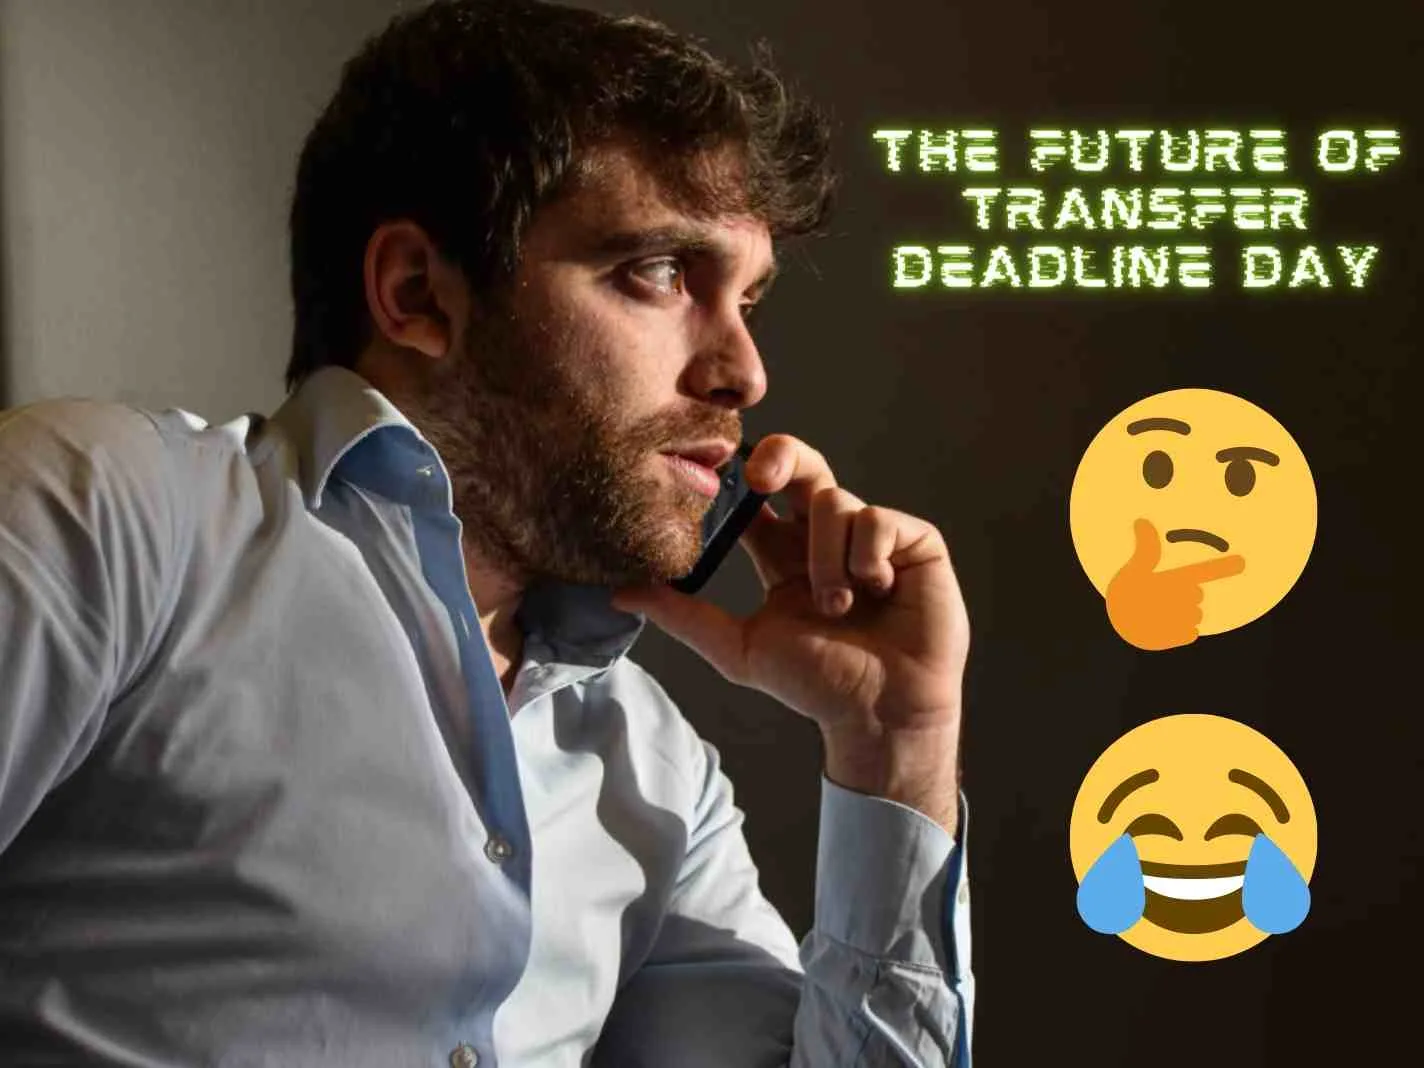 Photo of Fabrizio Romano along with text 'The Future of Transfer Deadline Day' plus thinking and crying laughing emoji